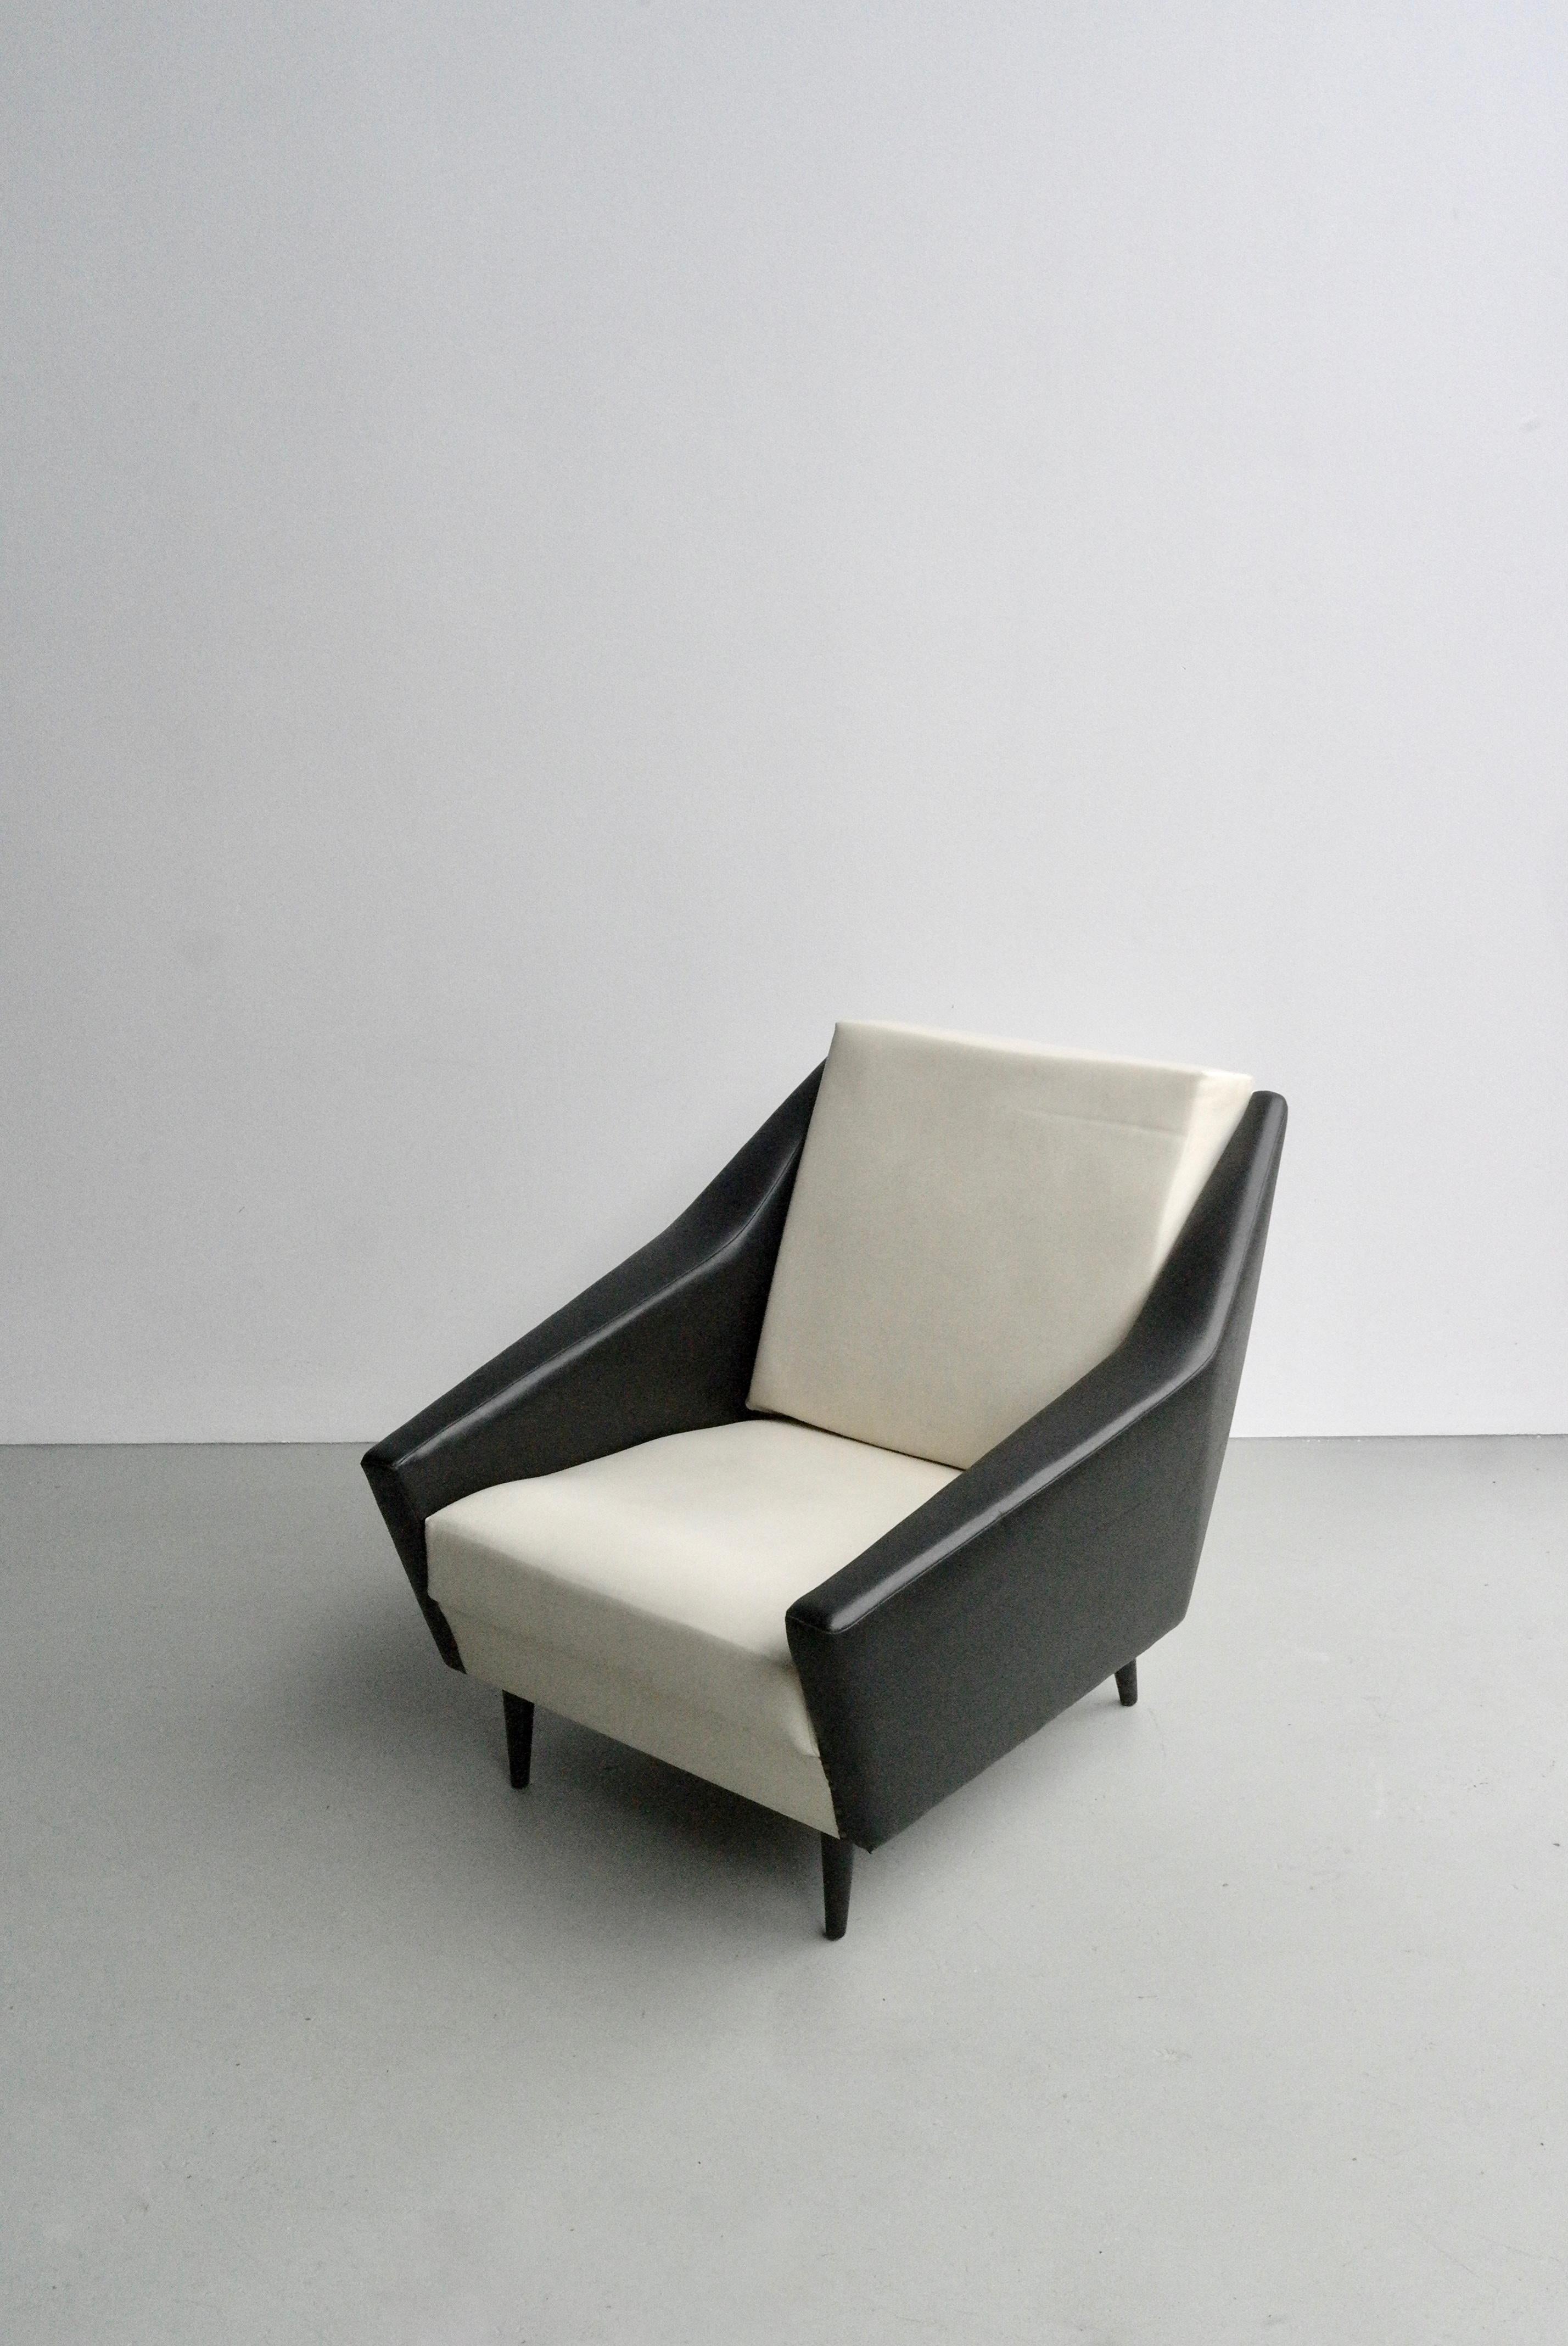 Wood Black and White Distex Style Lounge Chair, Italy, 1950s